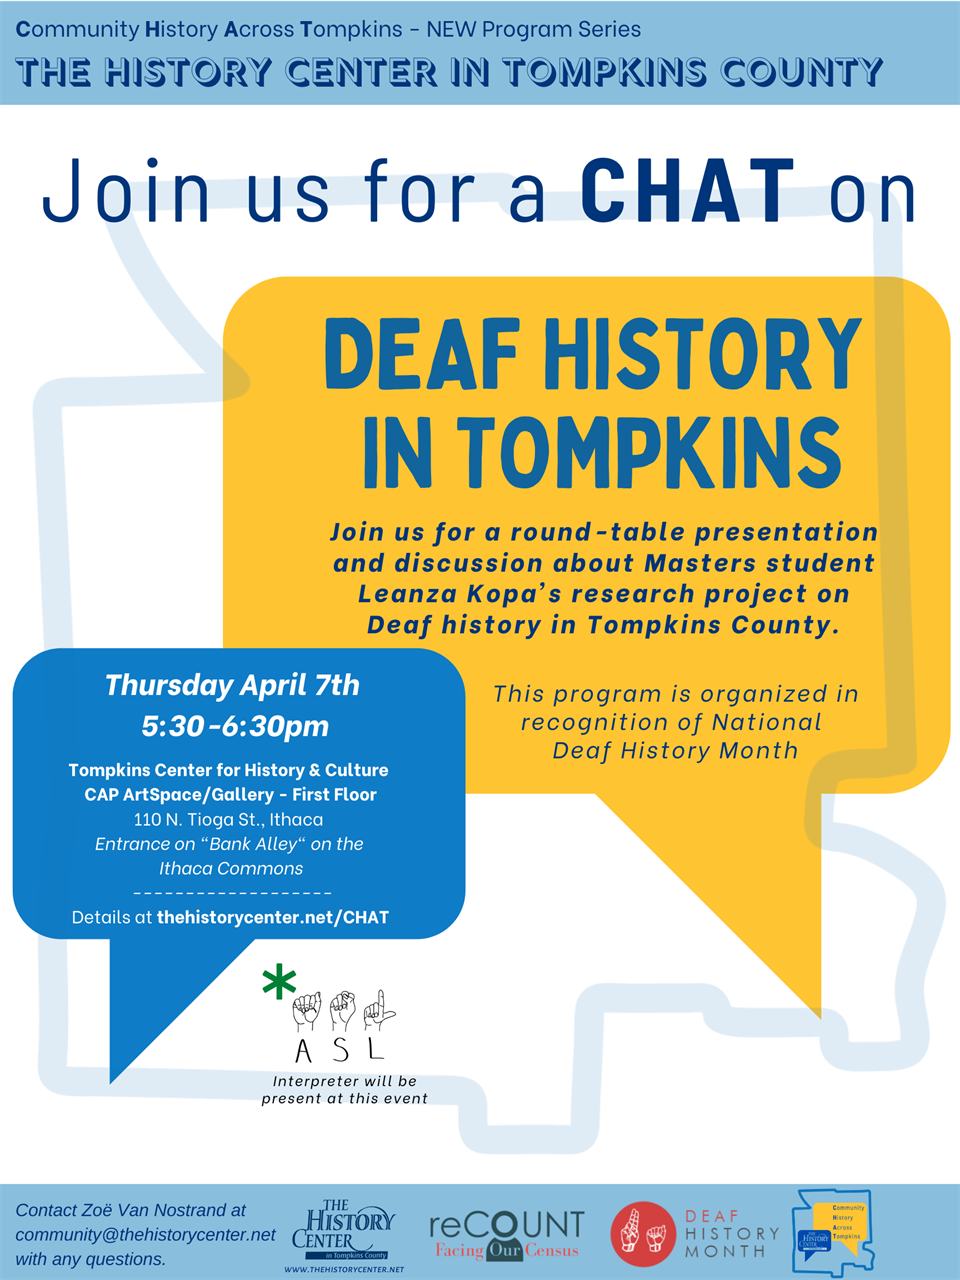 Flyer advertising previous CHAT on Deaf History in Tompkins in the CAP ArtSpace in the Tompkins Center for History and Culture. 